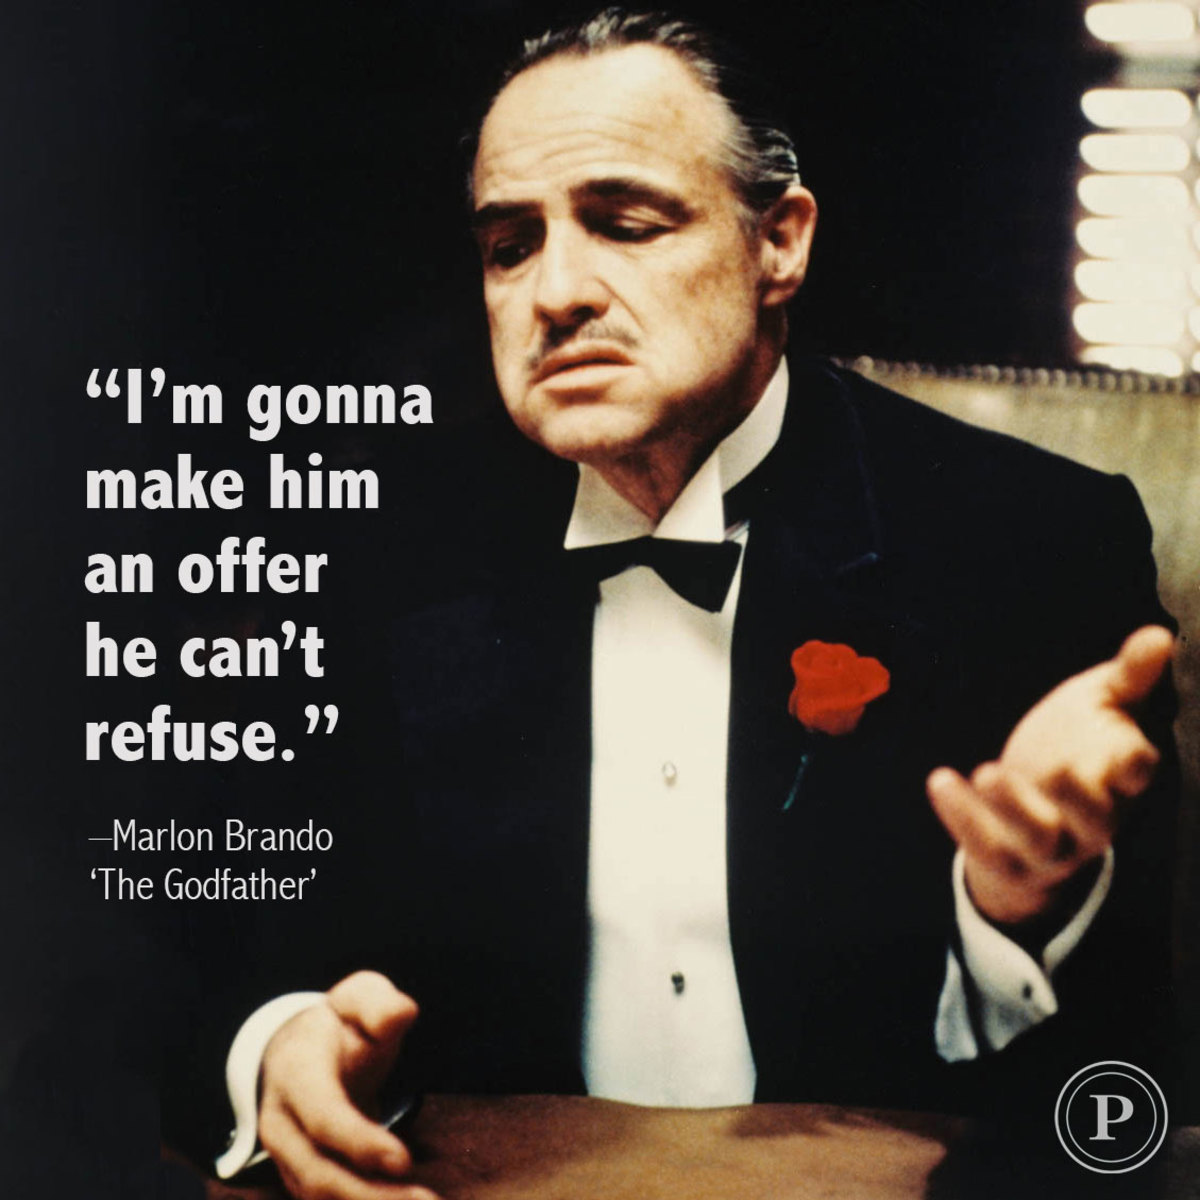 Iconic Quotes From the Godfather